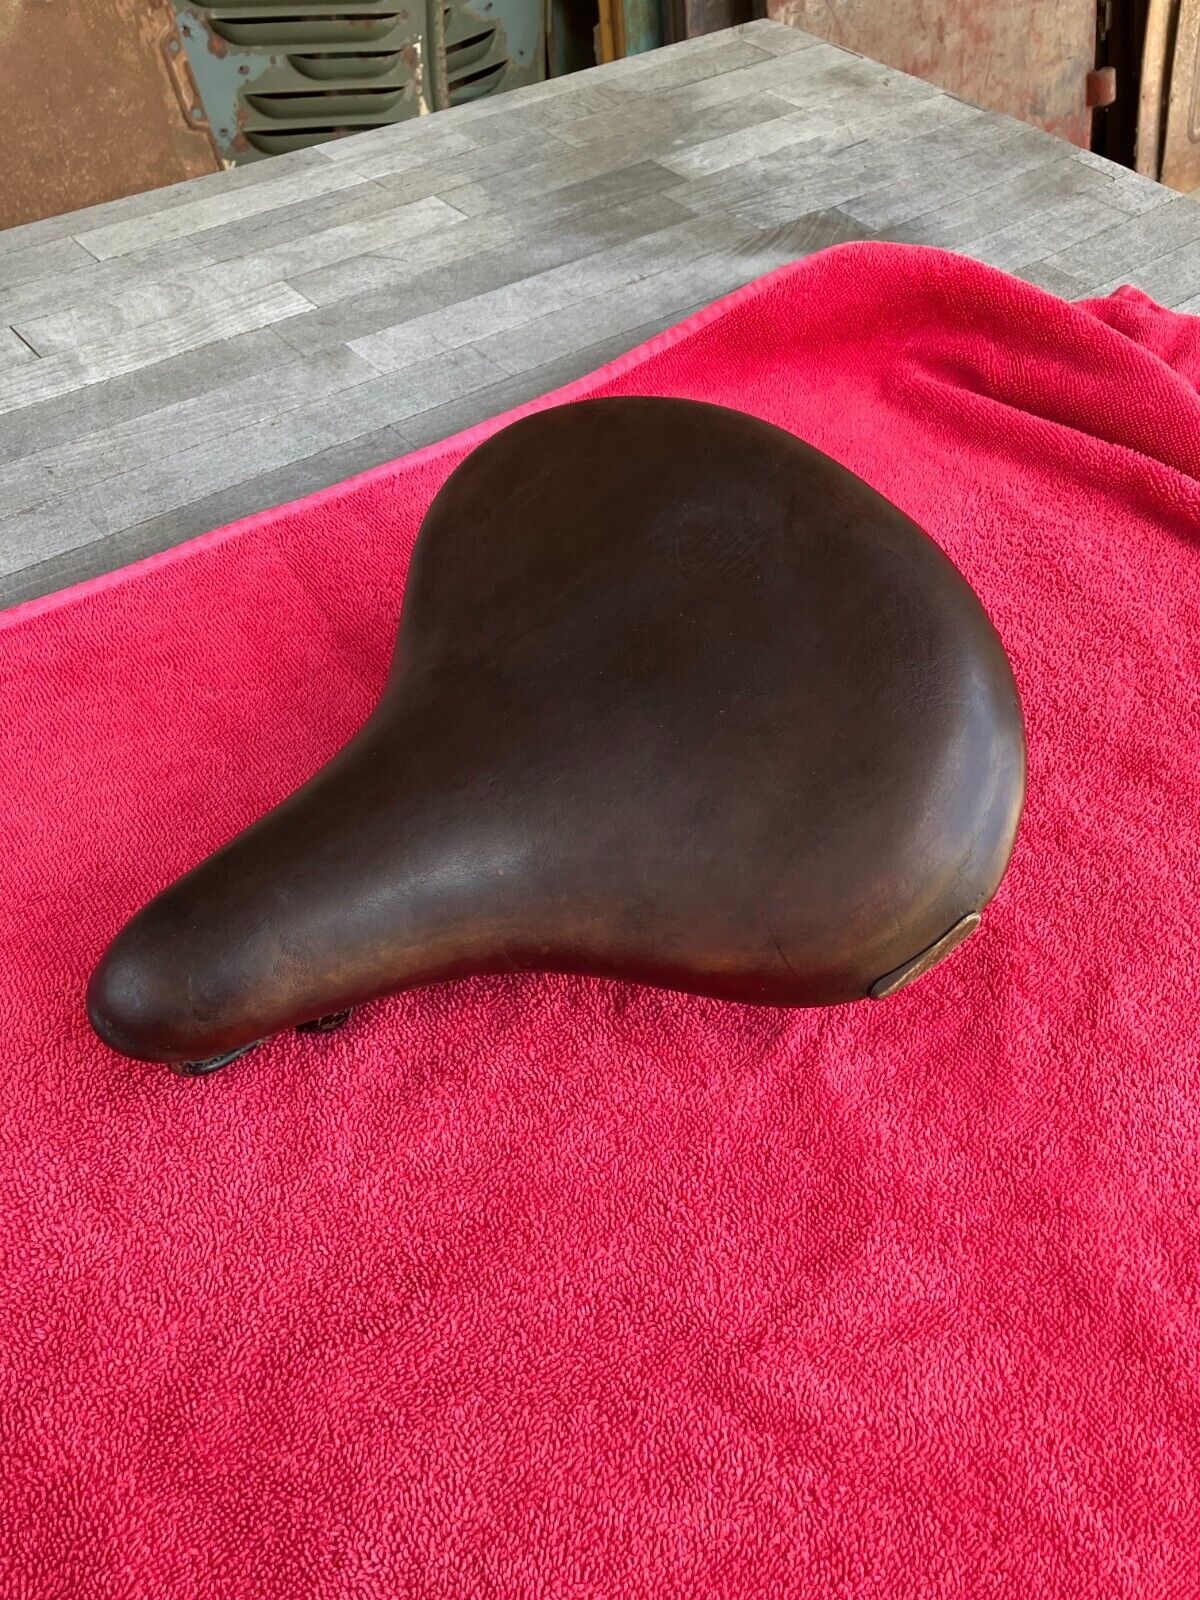 ORIGINAL 1940S MESINGER LEATHER SEAT FOR TOP OF THE LINE SCHWINN AUTO-CYCLES